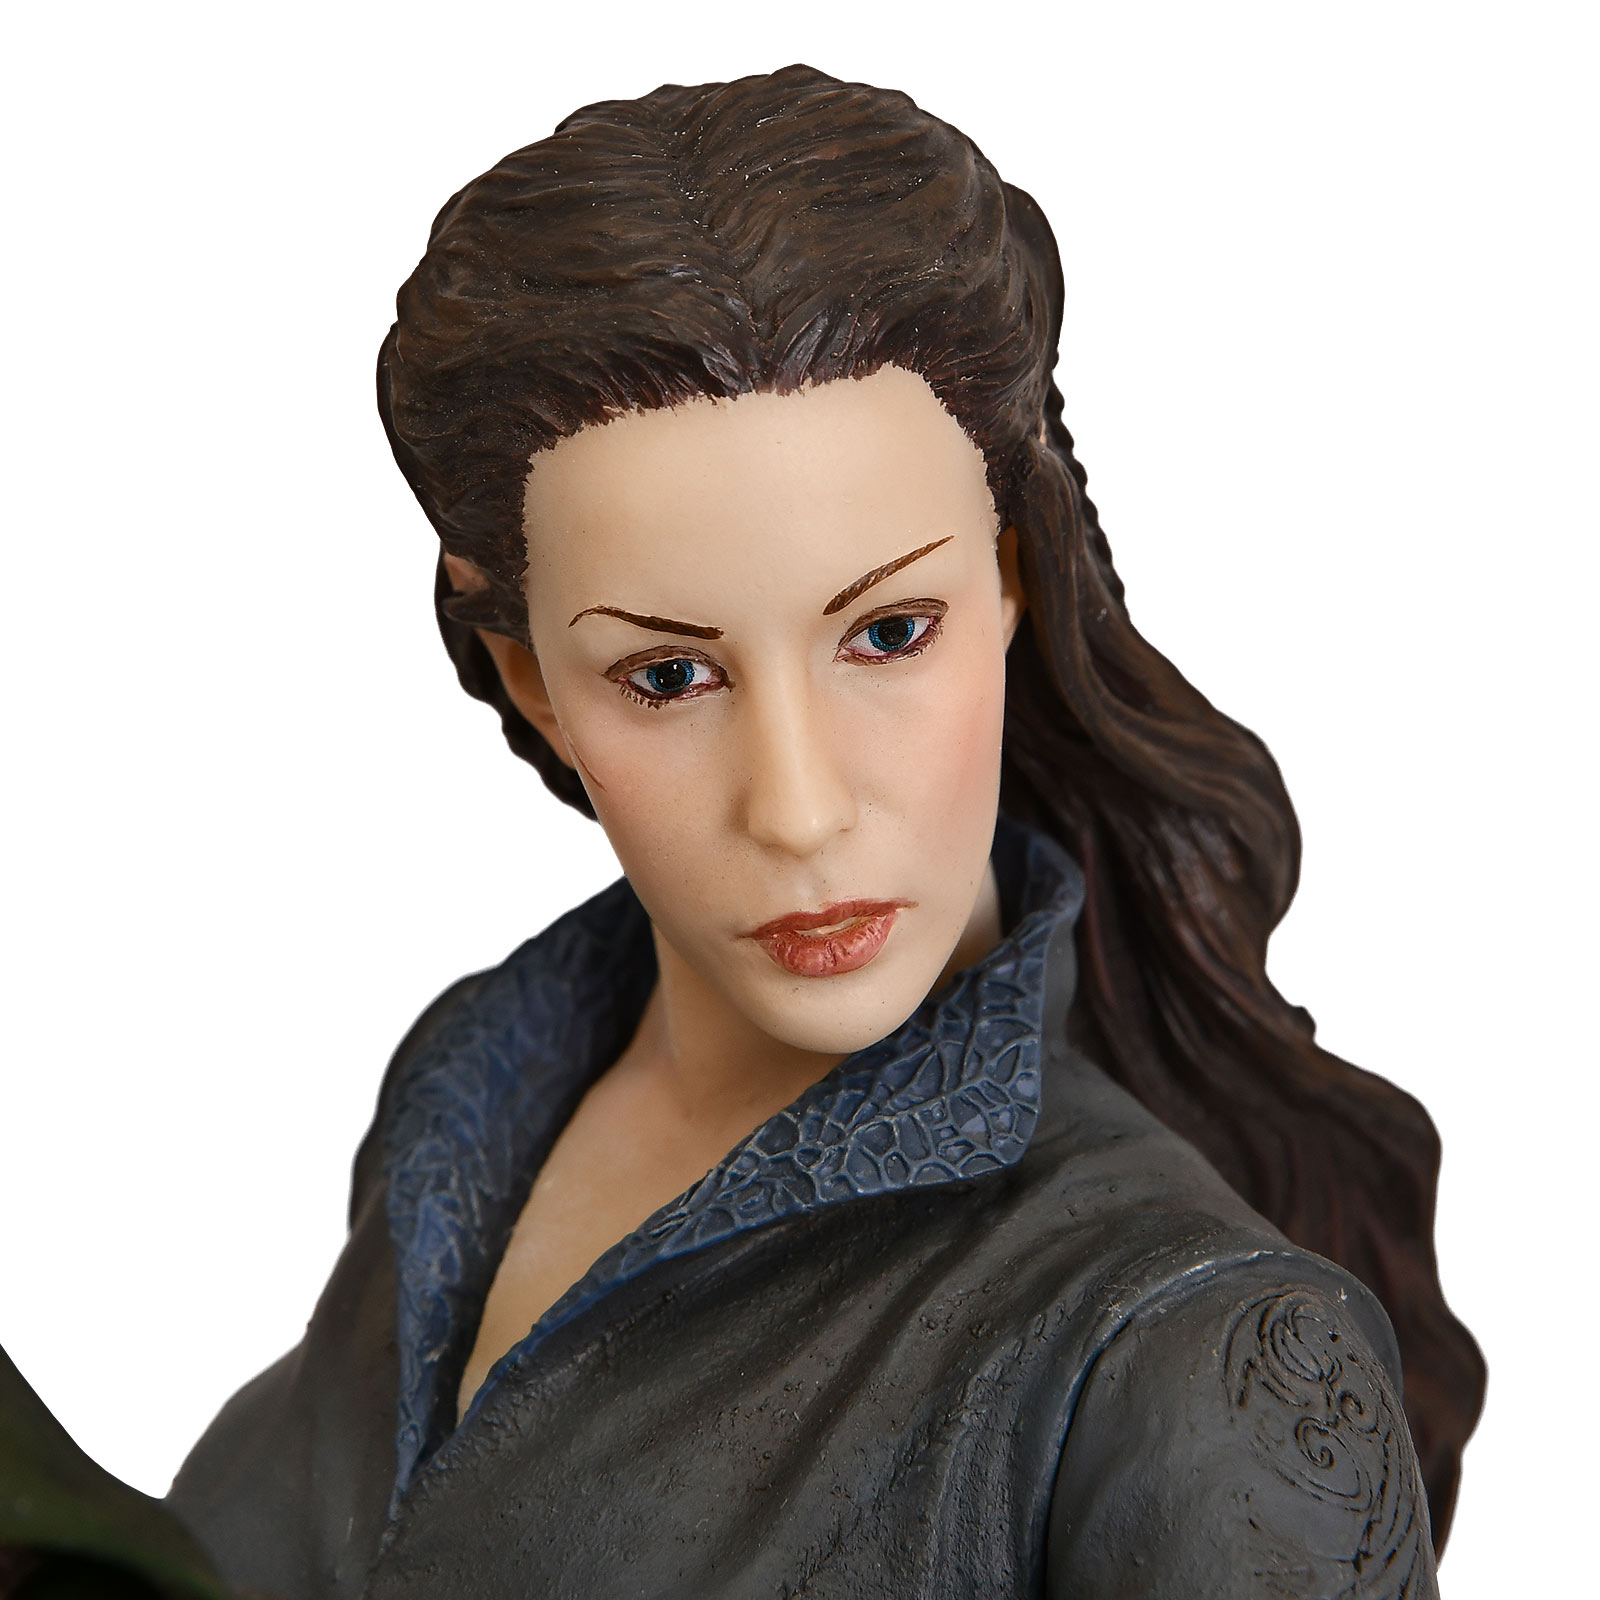 Lord of the Rings - Arwen & Frodo on Asfaloth Figure 48 cm deluxe